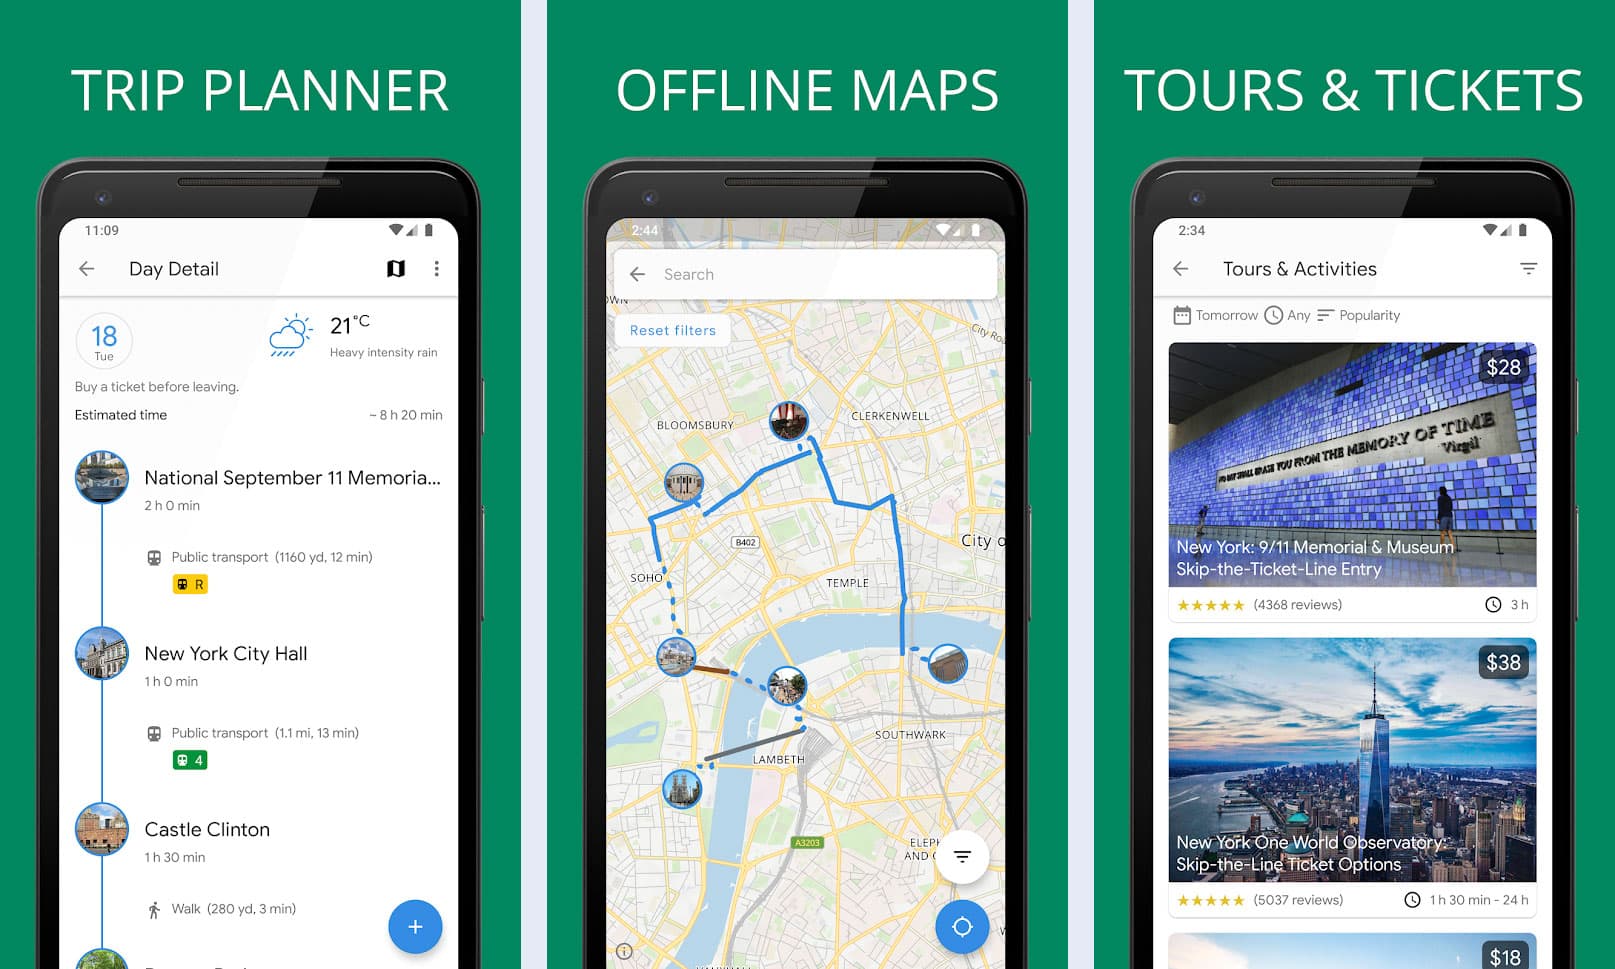  The image shows three mobile apps for organizing and optimizing trips, including a trip planner, offline maps, and a city guide with tours and tickets.